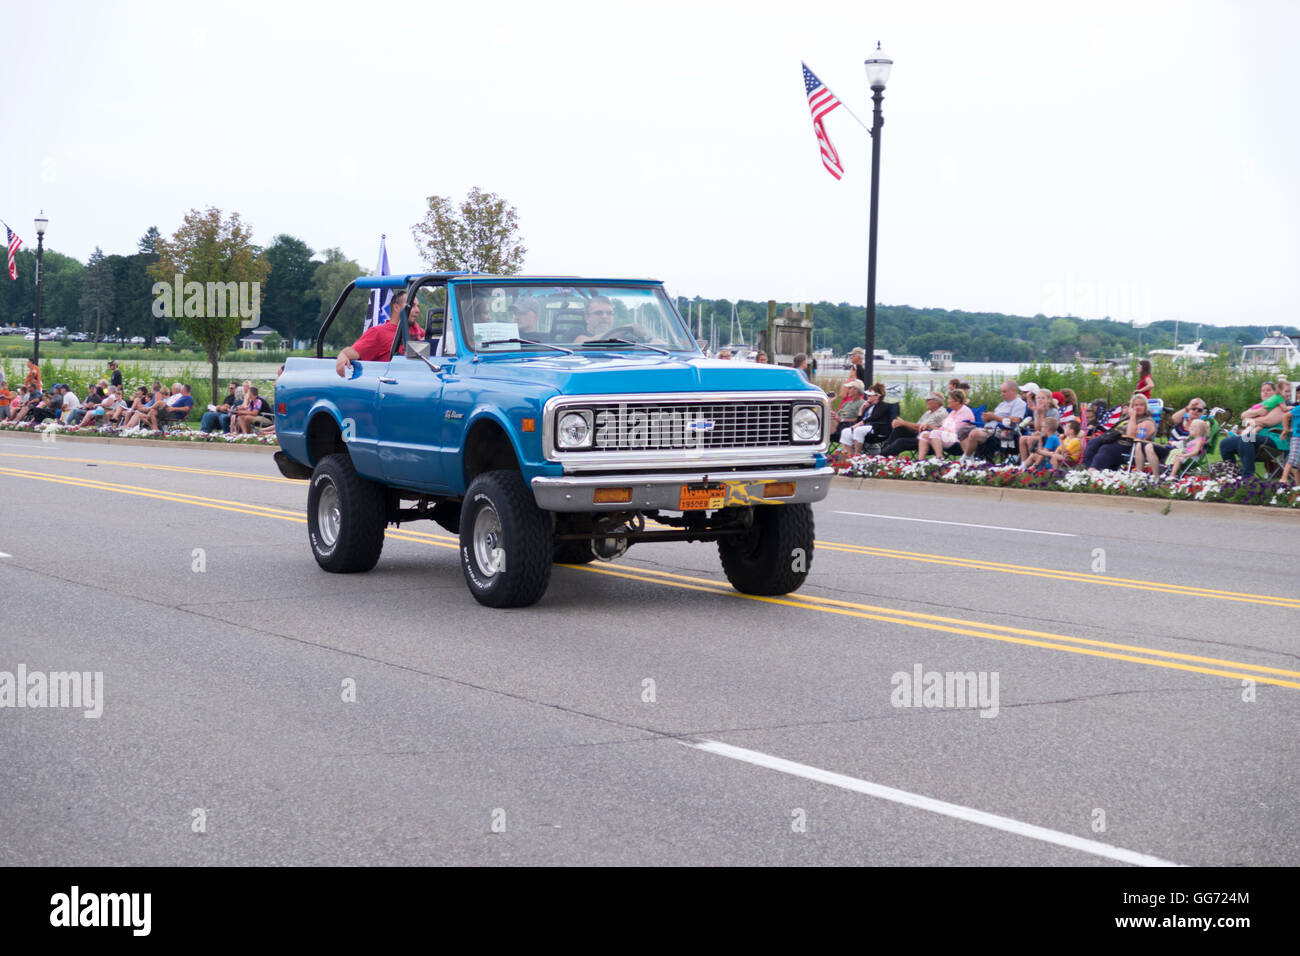 A vintage Chevy Blazer participates in the 2016 Annual Cruz In Parade through Whitehall and Montague, Michigan. Stock Photo